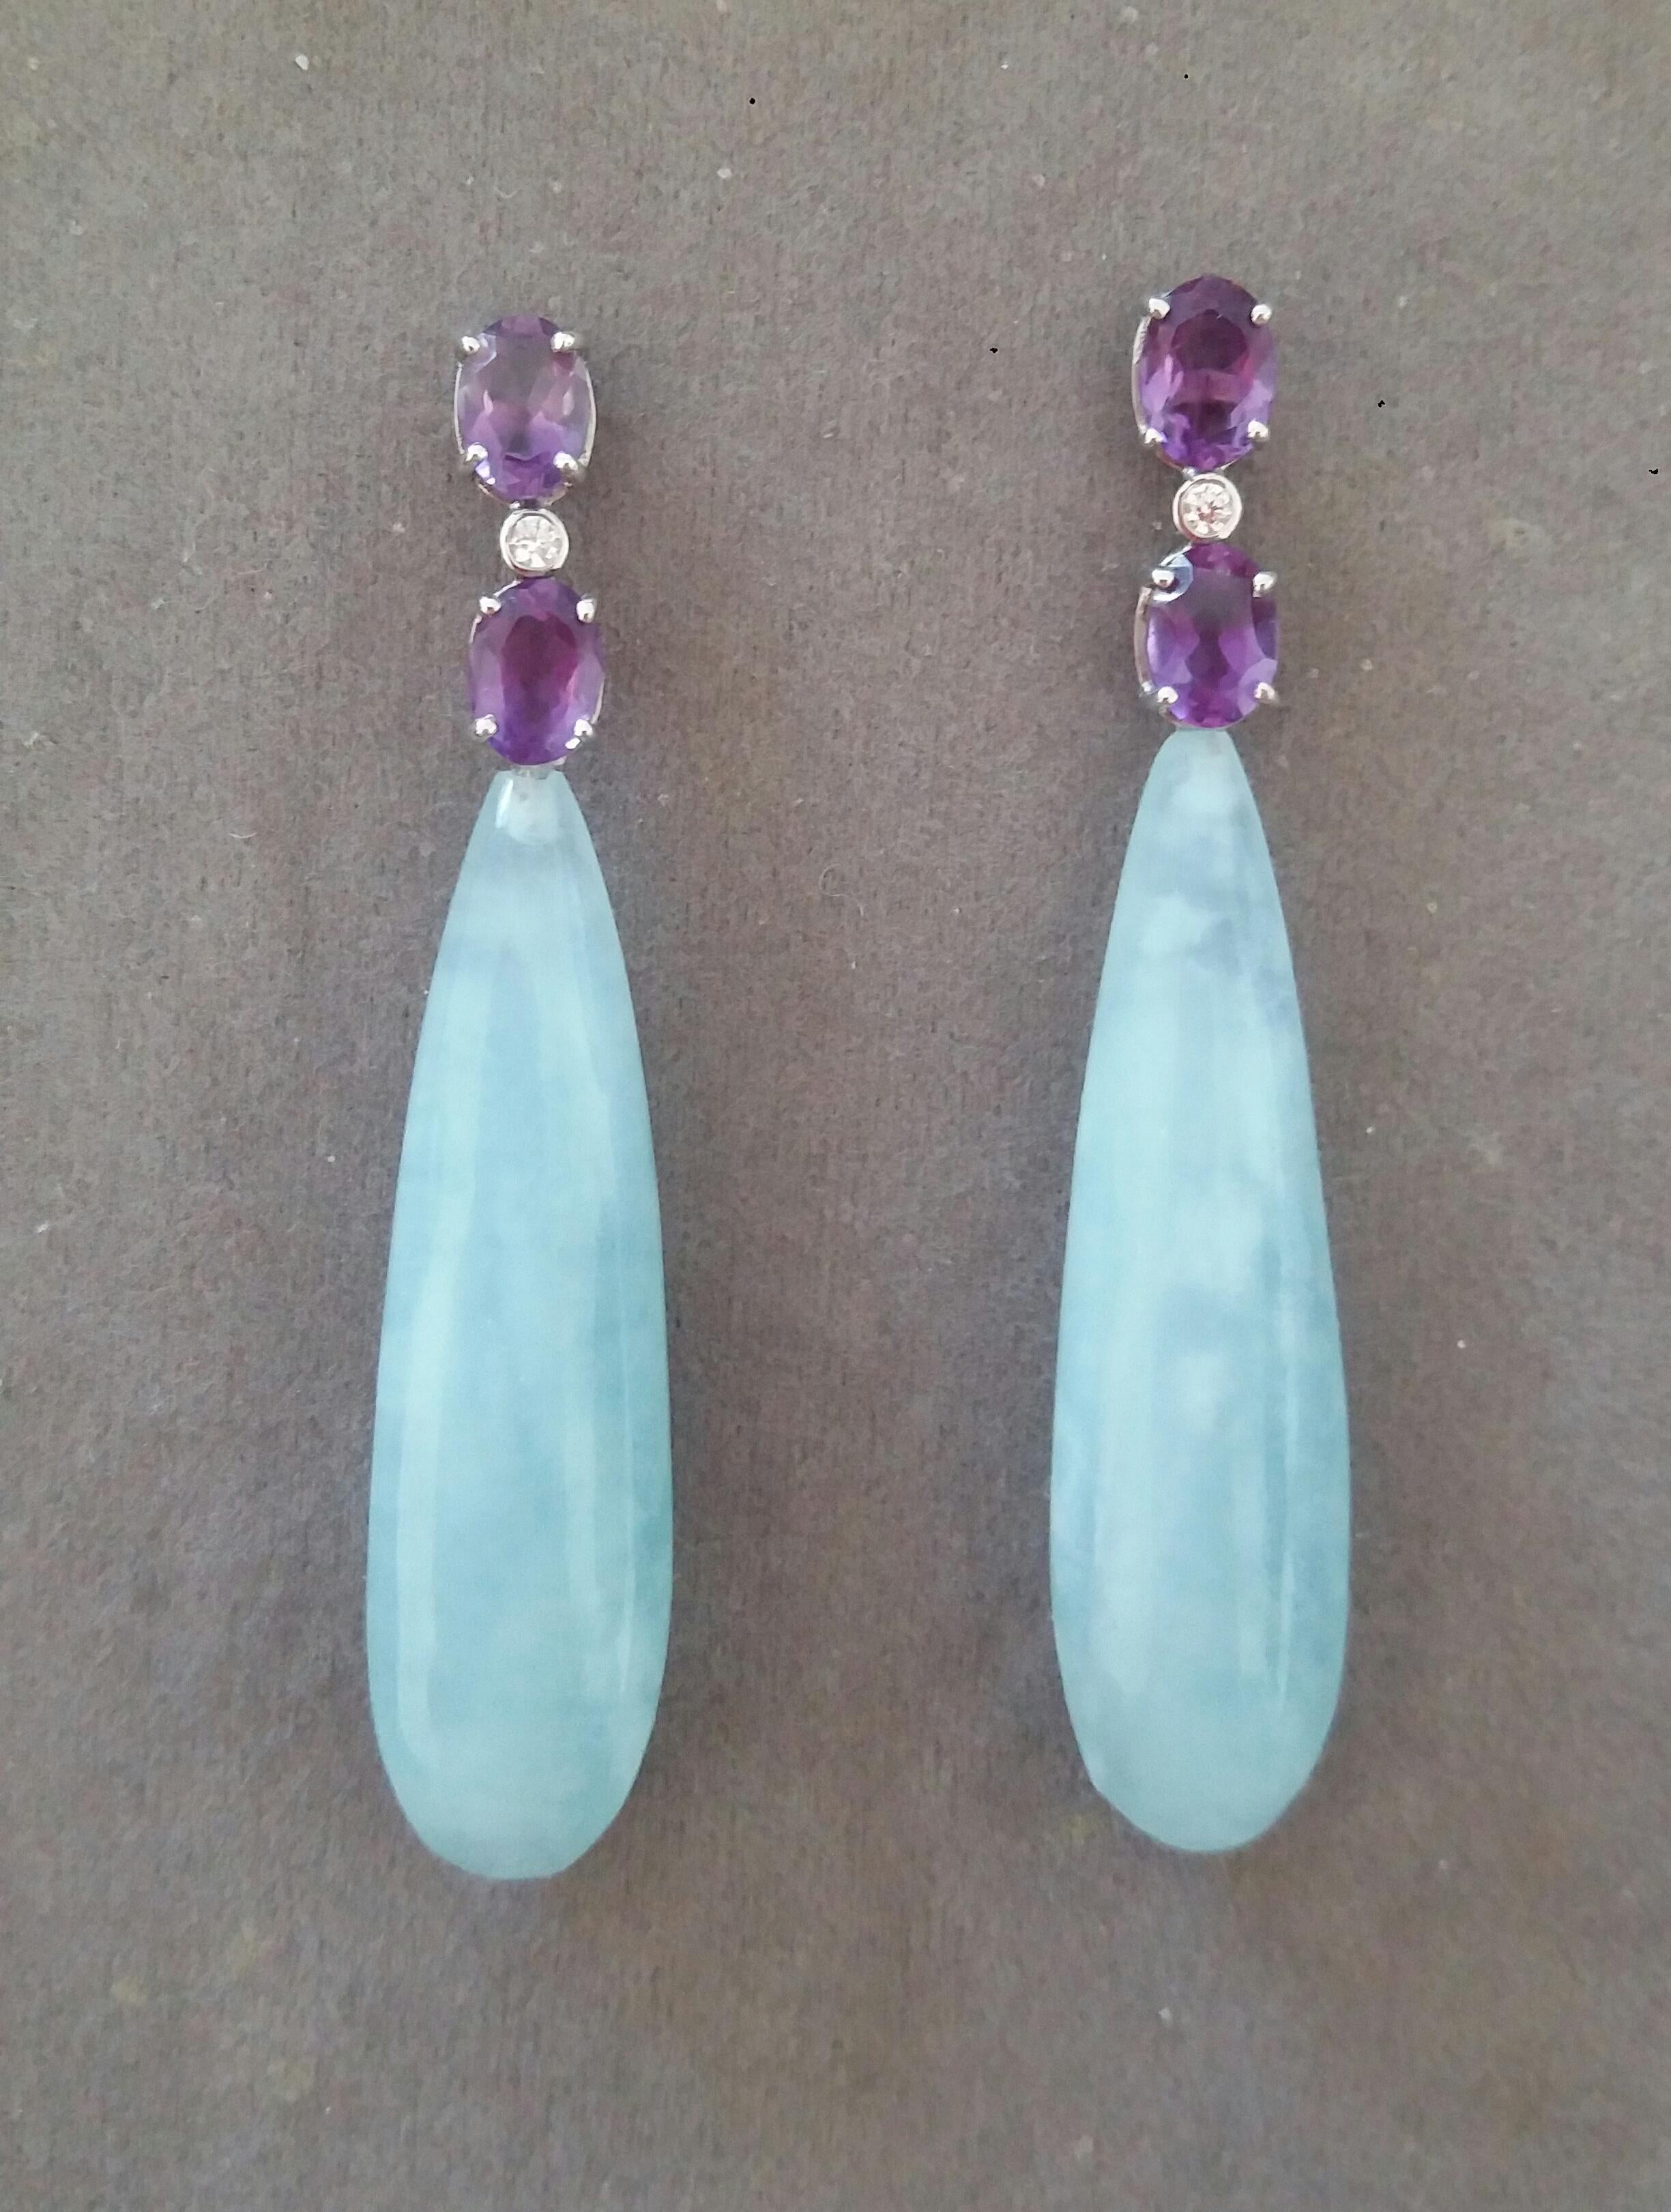 Elegant and completely handmade Earrings consisting of an upper part of 2 oval shape faceted Amethyst of 5 x 7 mm set together in 14 Kt white gold with a  small diamond in the middle, at the bottom 2 Aquamarine Plain Round Drops measuring 12x43